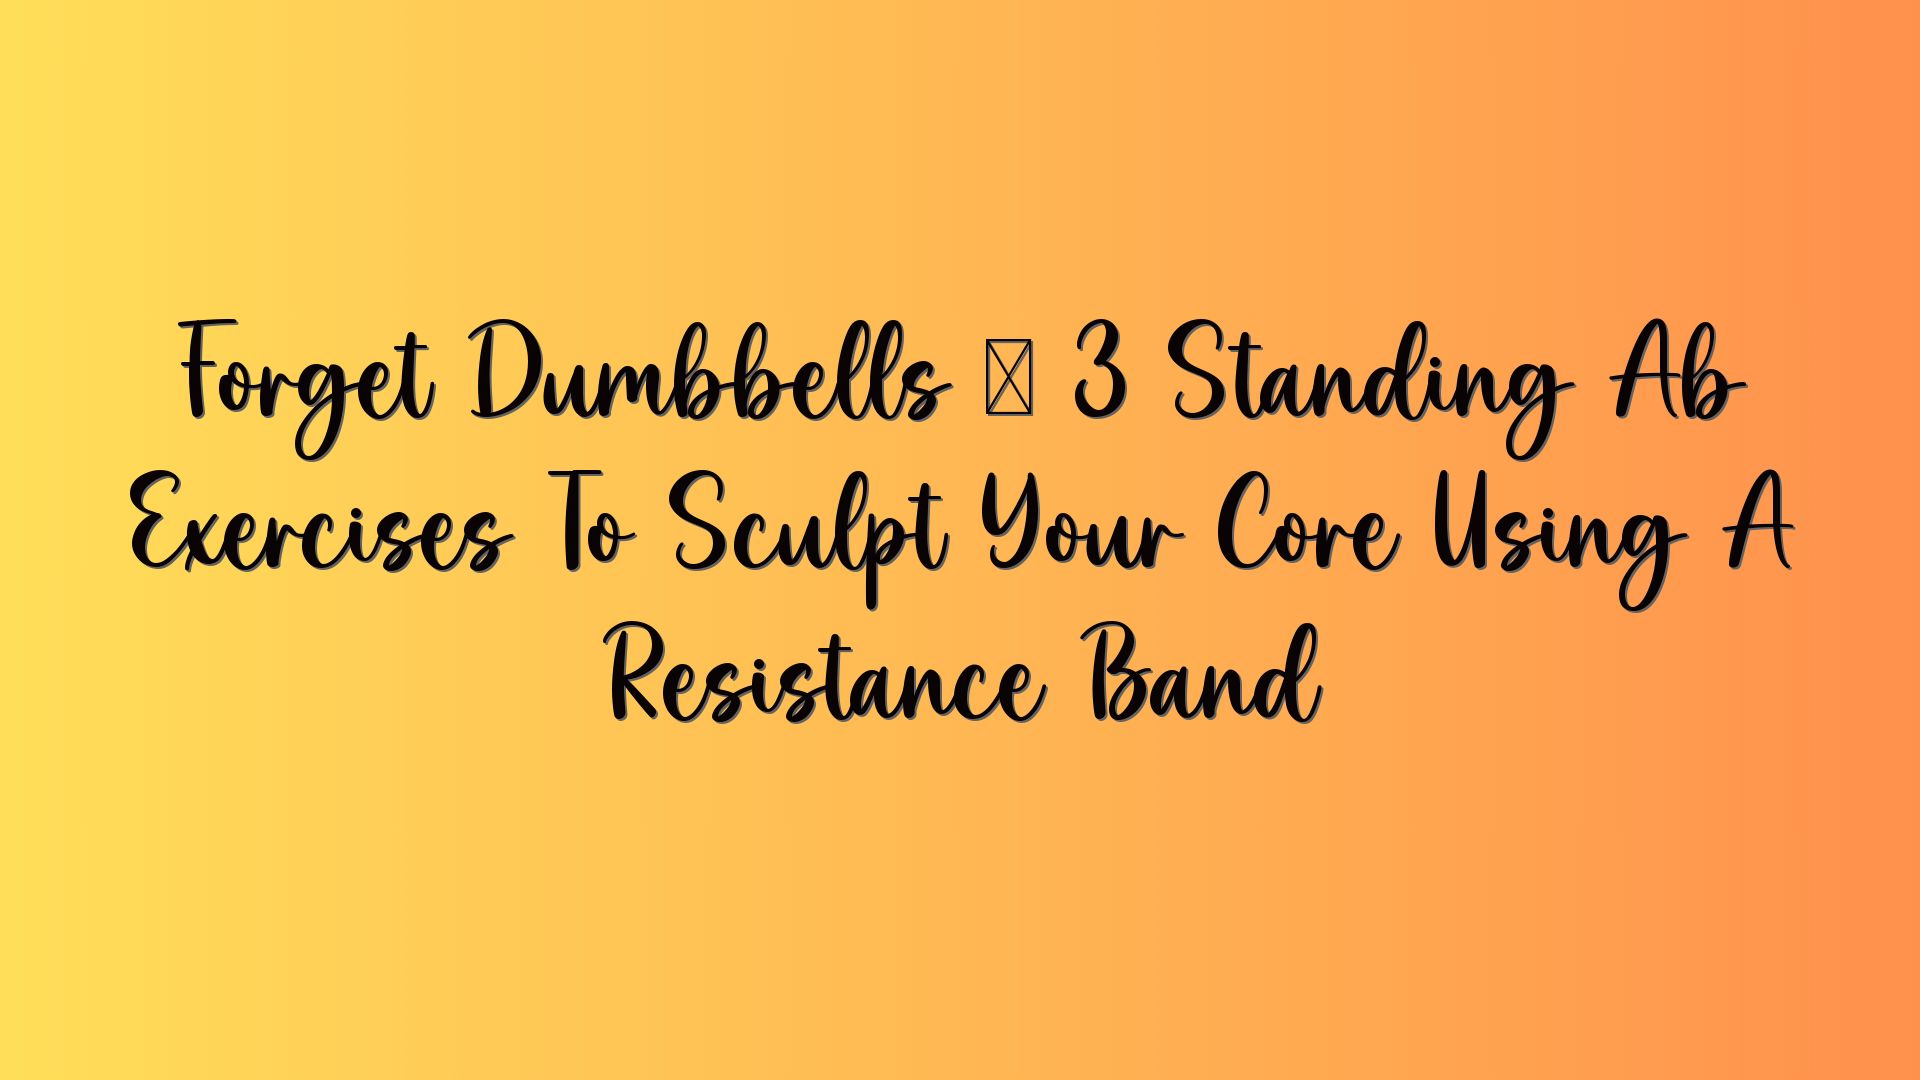 Forget Dumbbells — 3 Standing Ab Exercises To Sculpt Your Core Using A Resistance Band